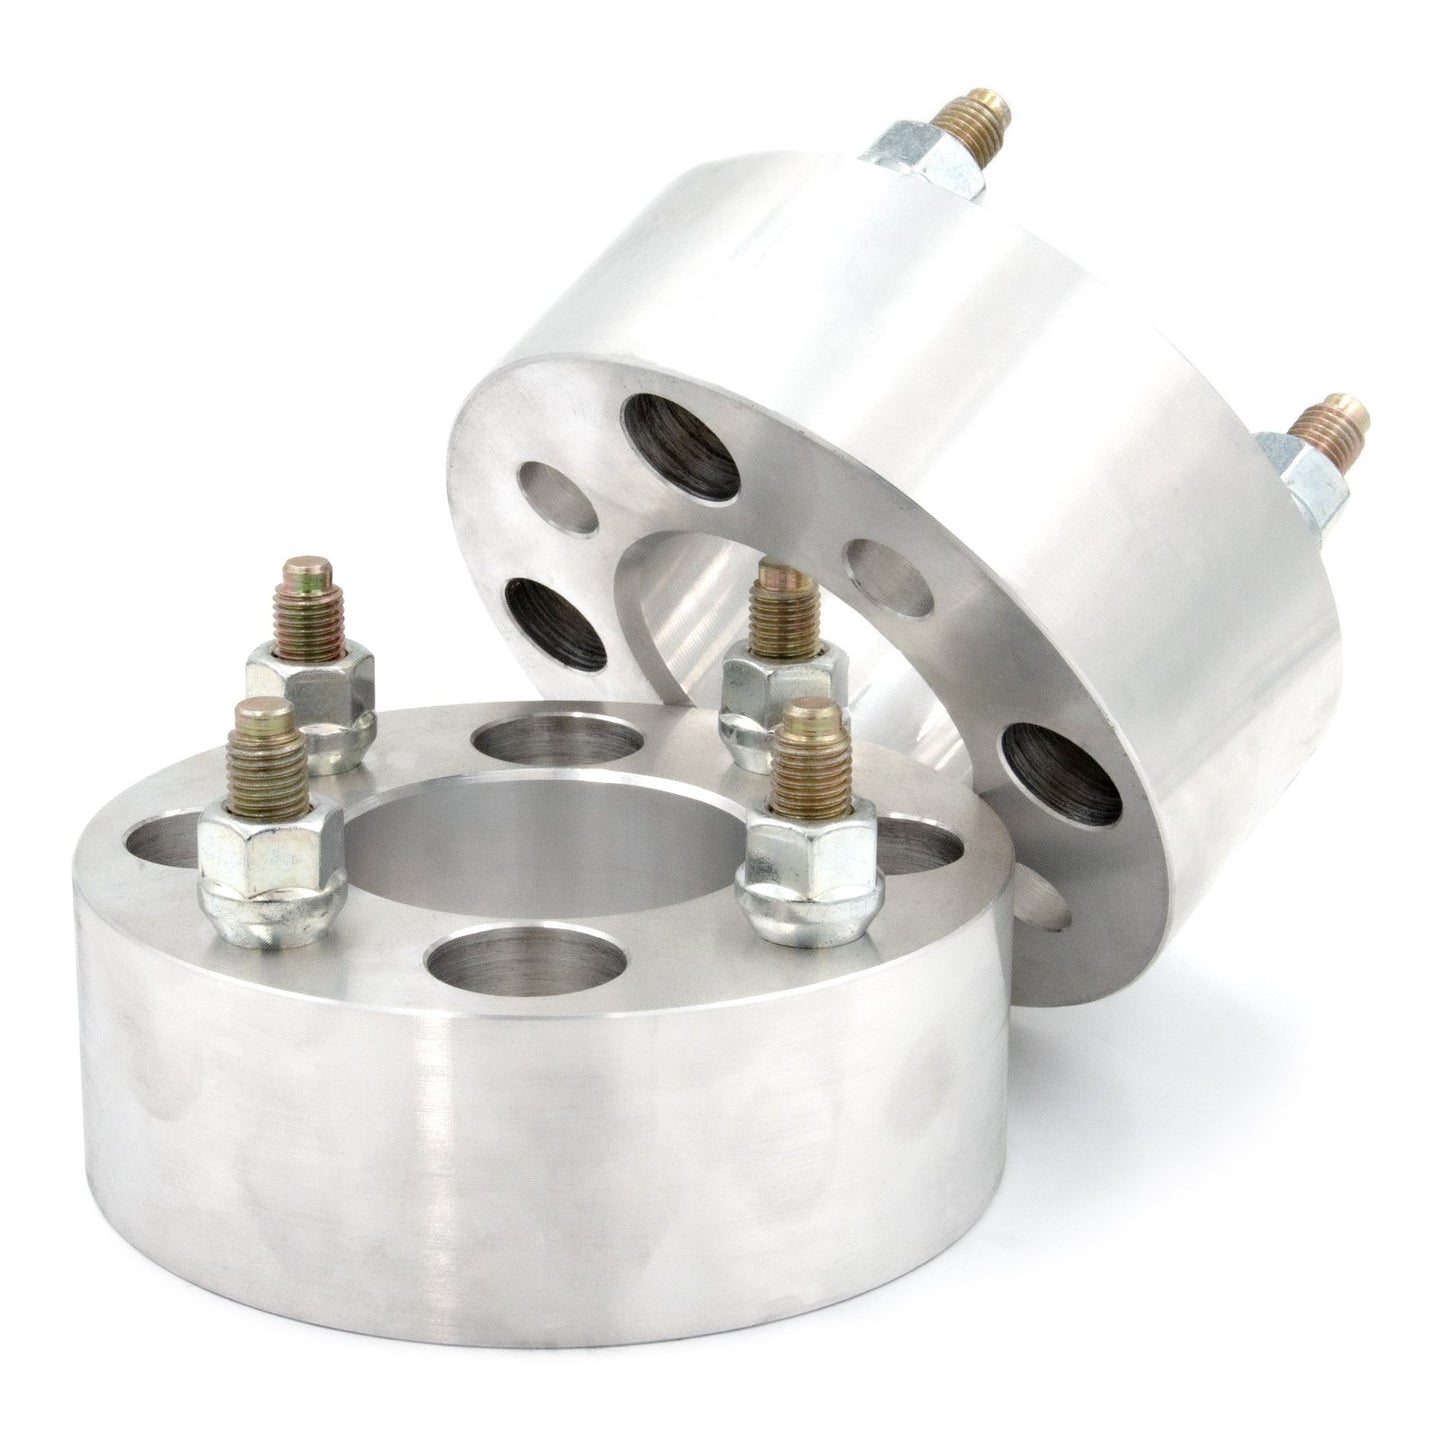 4x4.5" to 4x100 Wheel Spacer/Adapter - Thickness: 3/4"- 4"